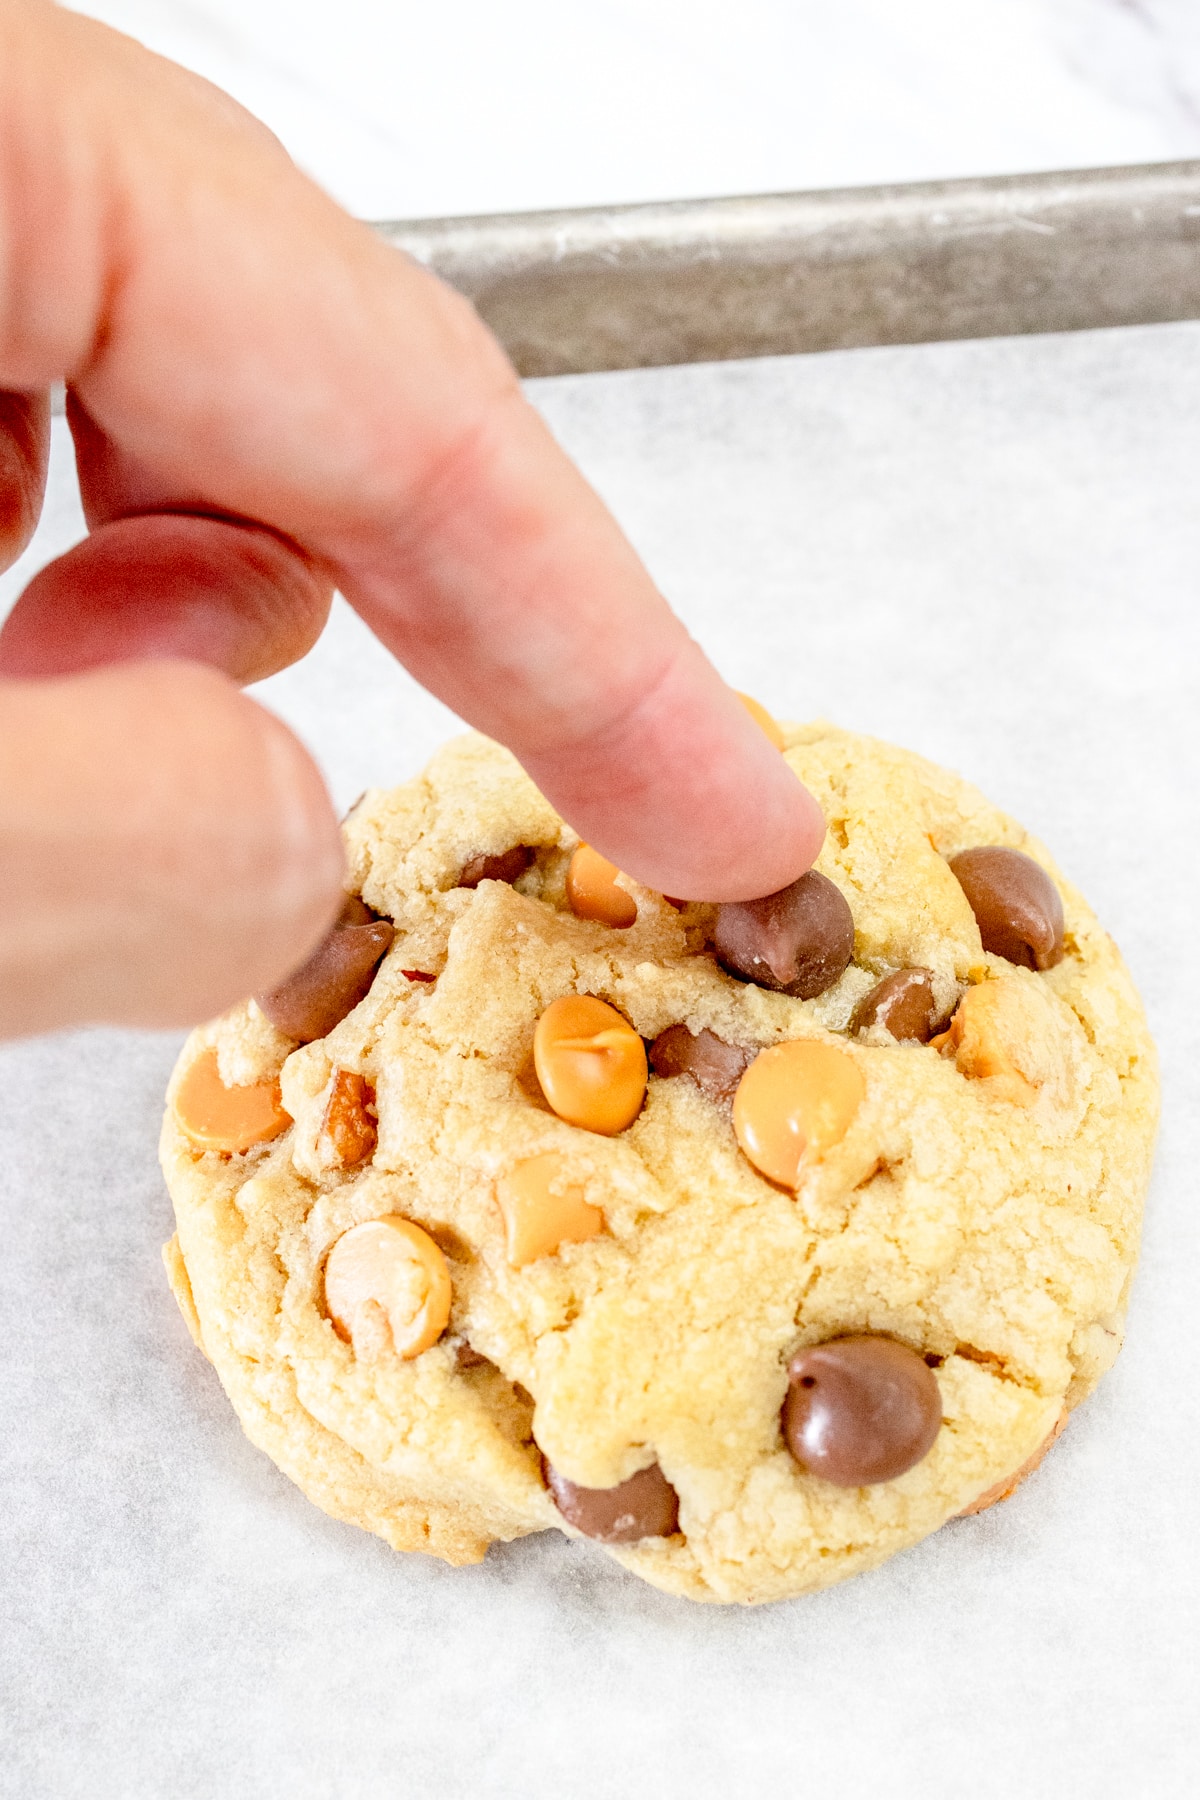 Close up of a hand gently pressing chocolate chips and butterscotch chips into a cookie before baking.